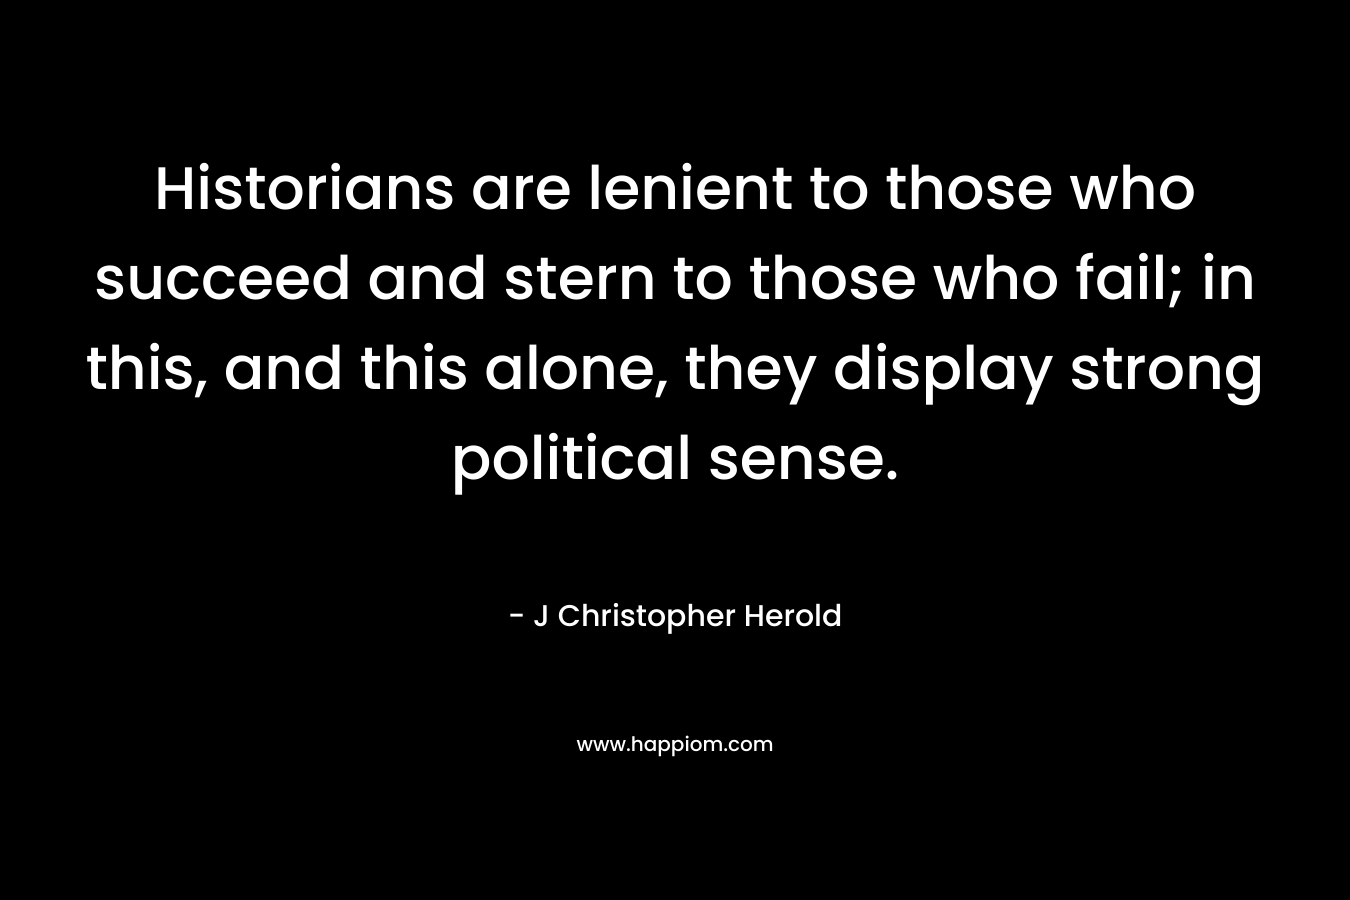 Historians are lenient to those who succeed and stern to those who fail; in this, and this alone, they display strong political sense.